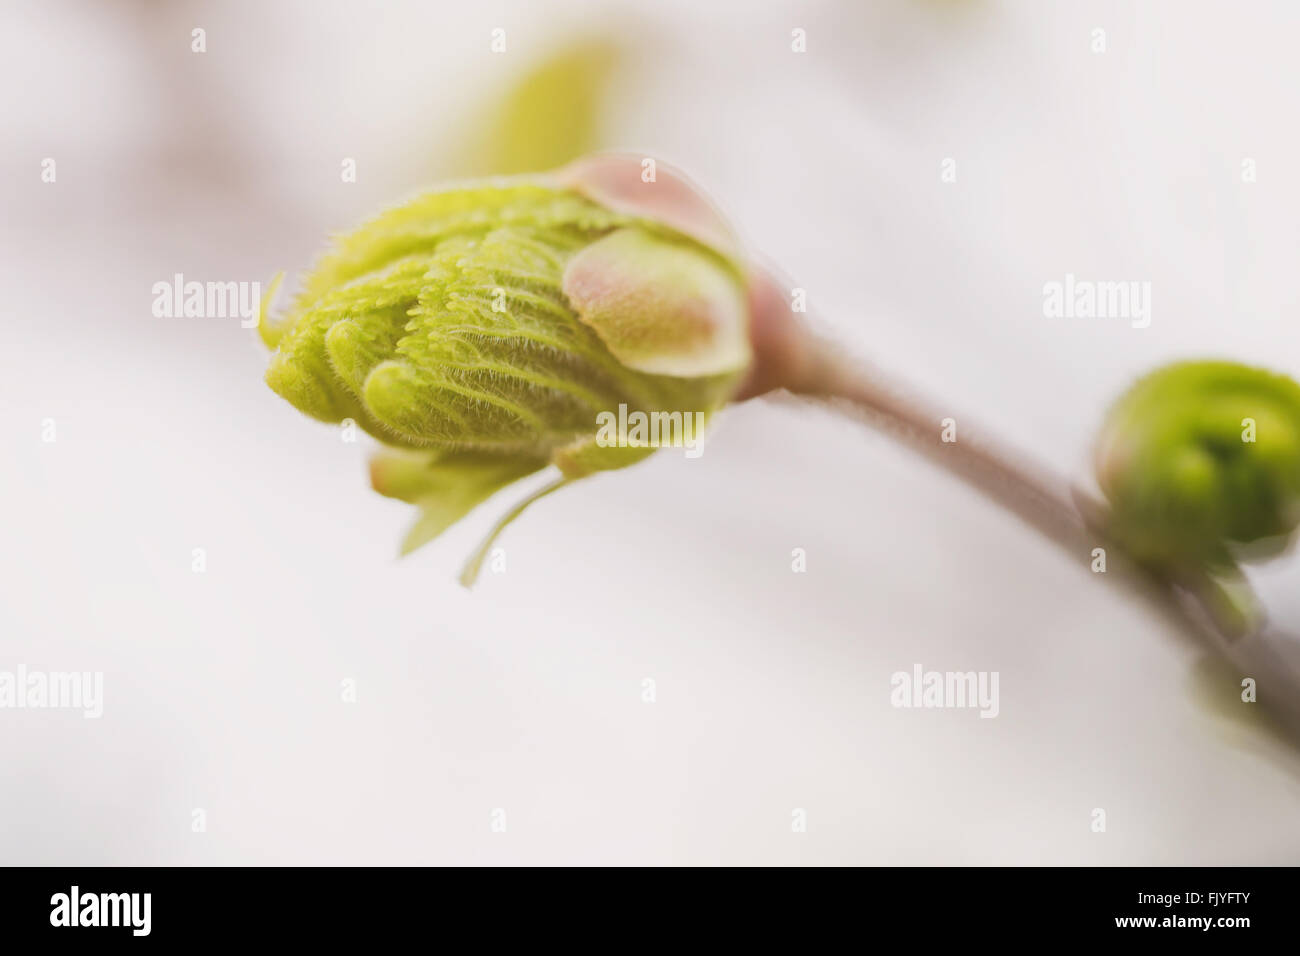 first leaves and buds on linden tree springtime photo Stock Photo